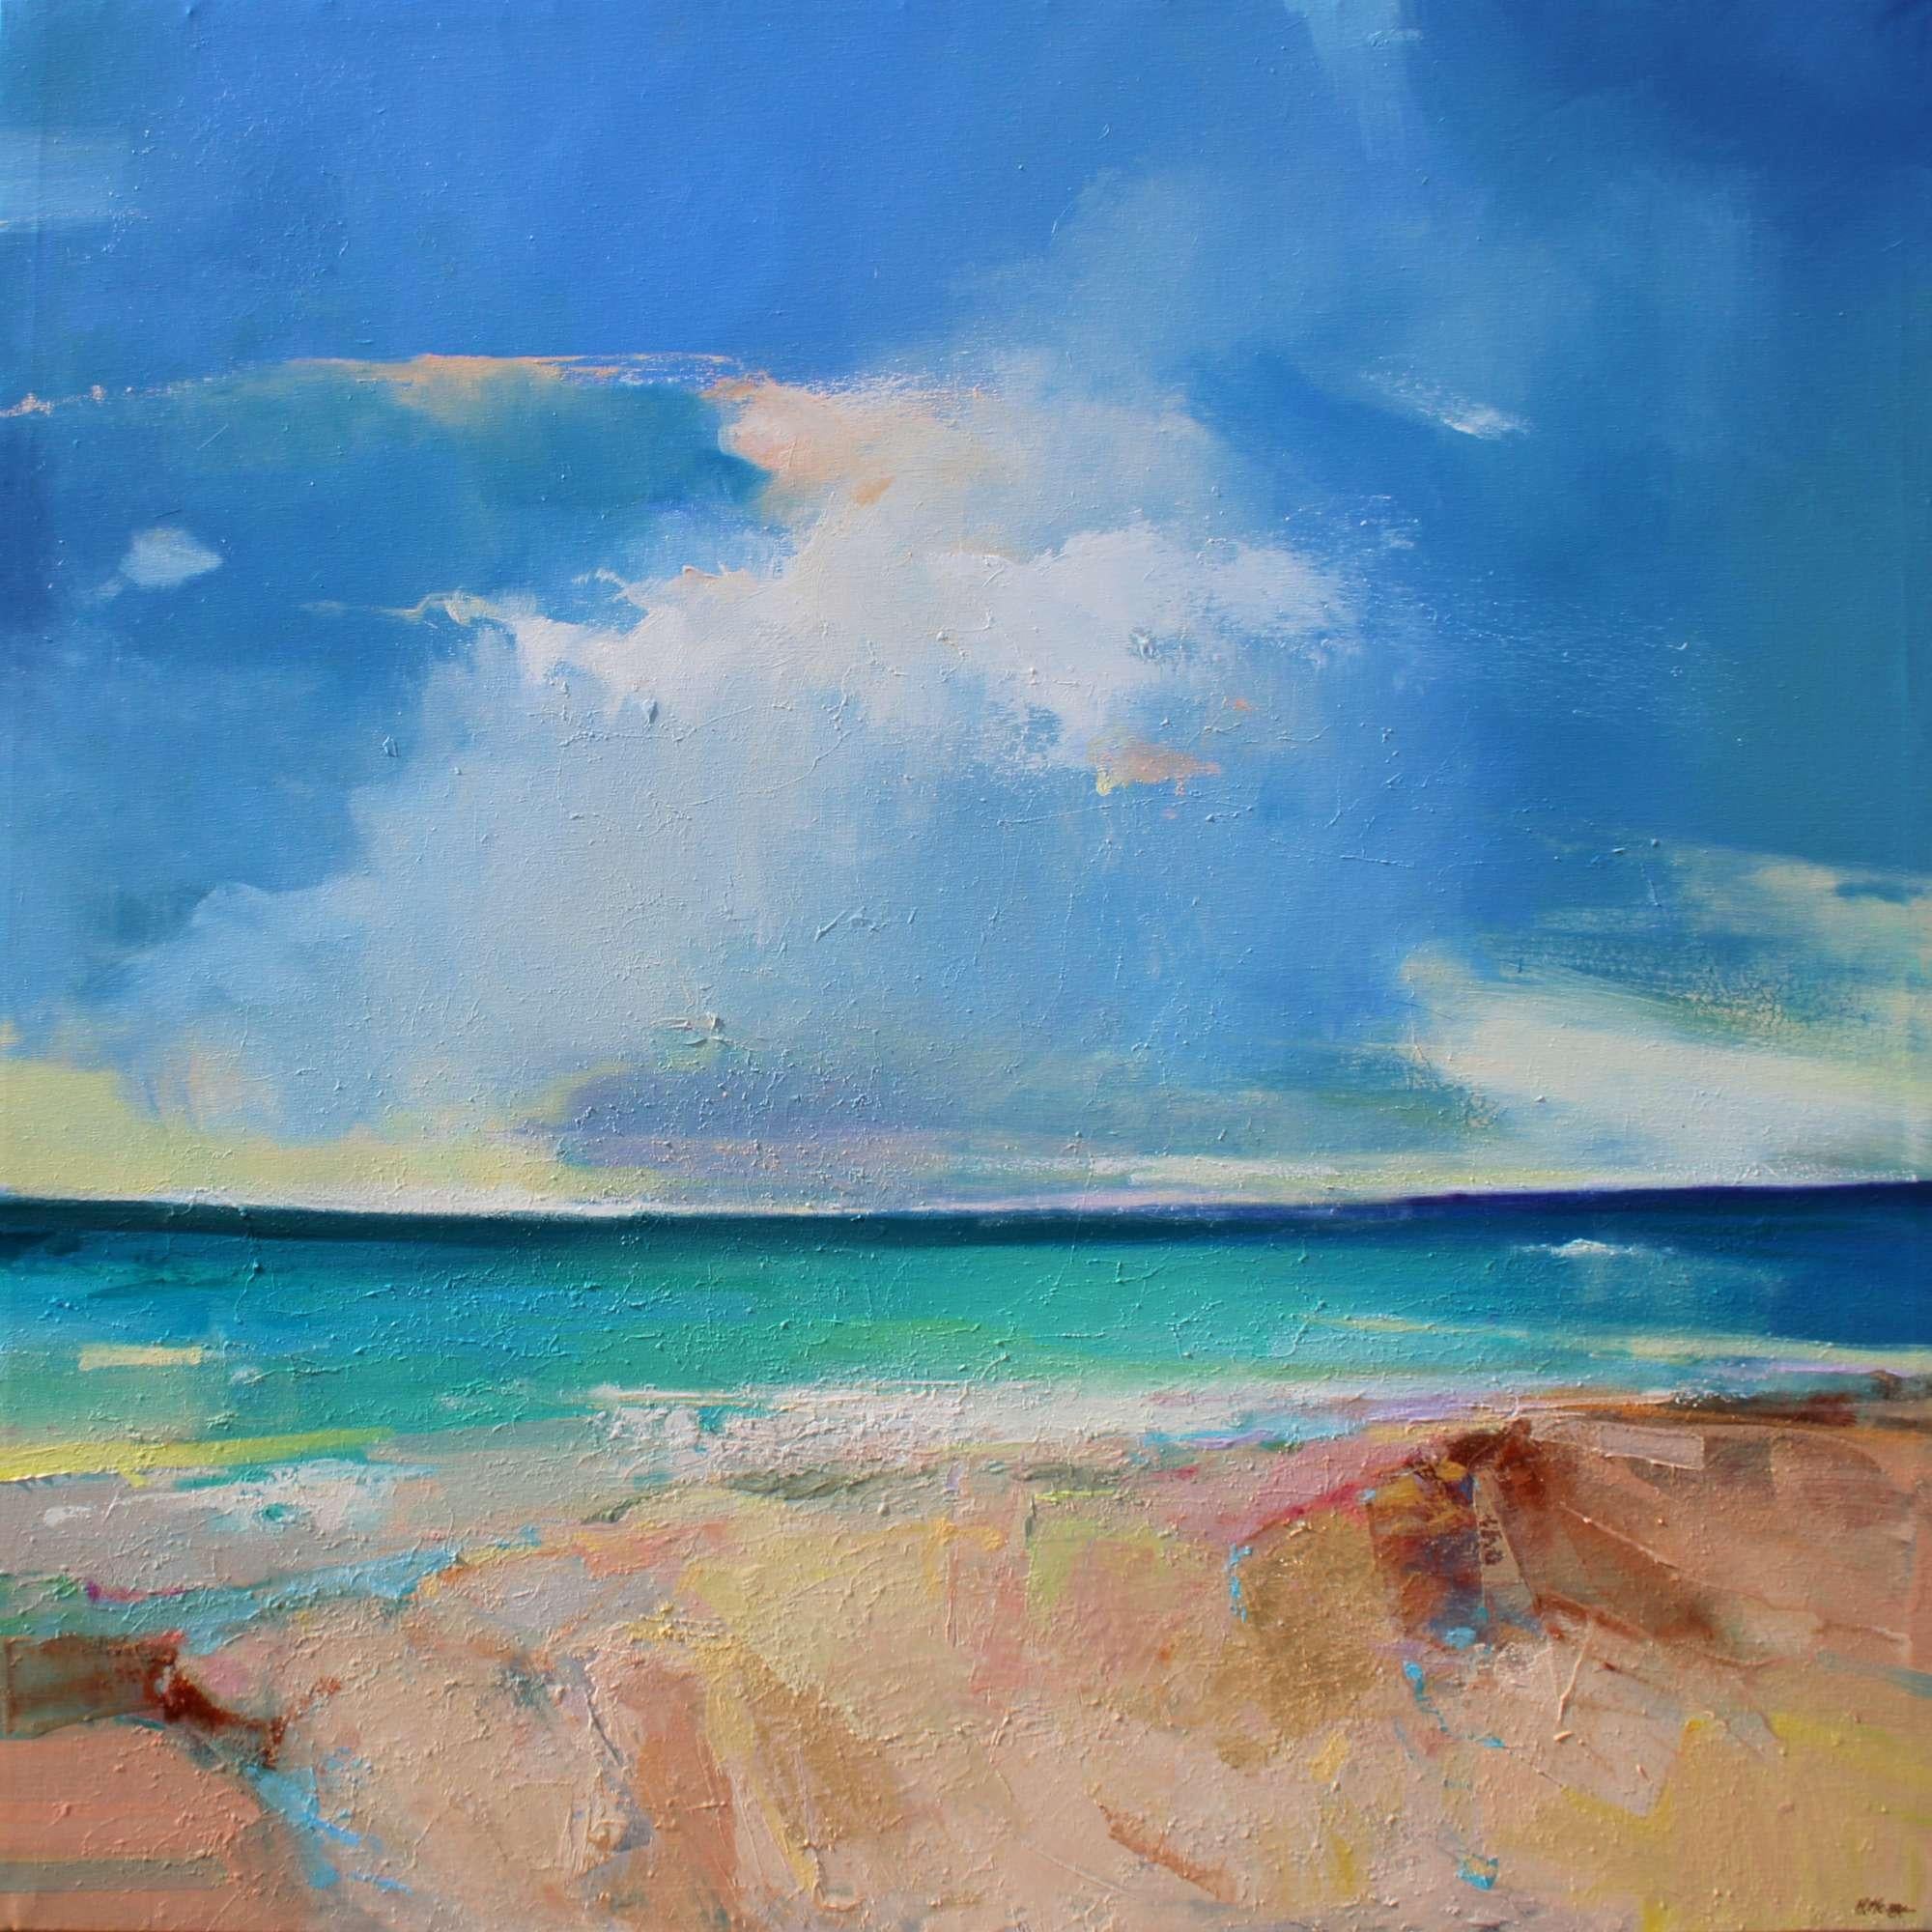 Summer Light-original contemporary  abstract beach seascape painting- Modern Art - Painting by Magdalena Morey